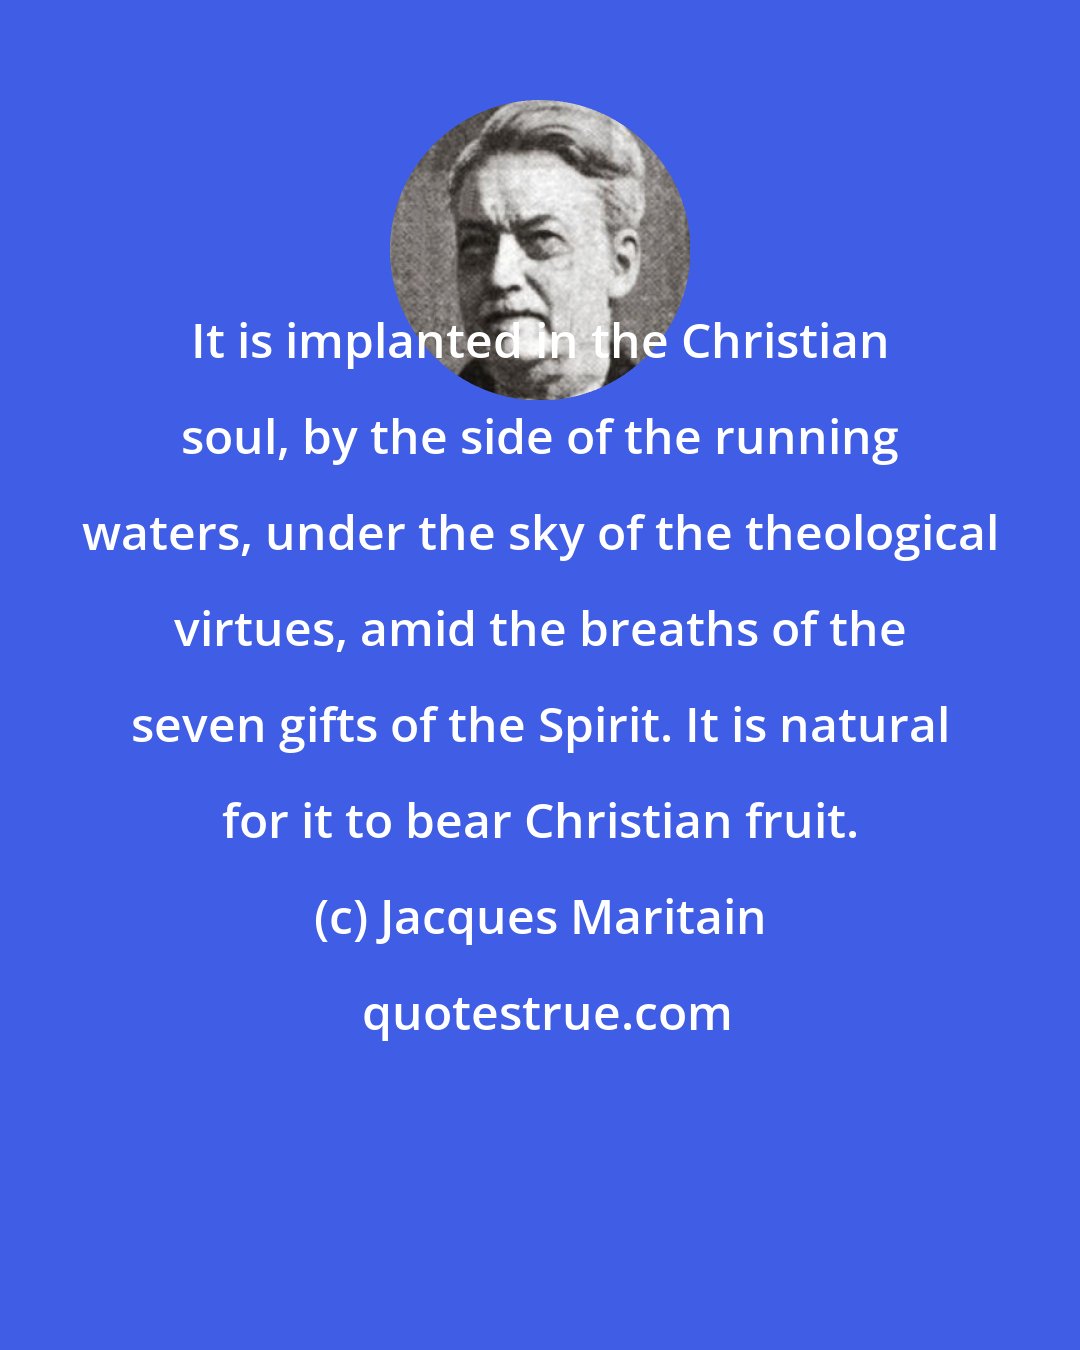 Jacques Maritain: It is implanted in the Christian soul, by the side of the running waters, under the sky of the theological virtues, amid the breaths of the seven gifts of the Spirit. It is natural for it to bear Christian fruit.